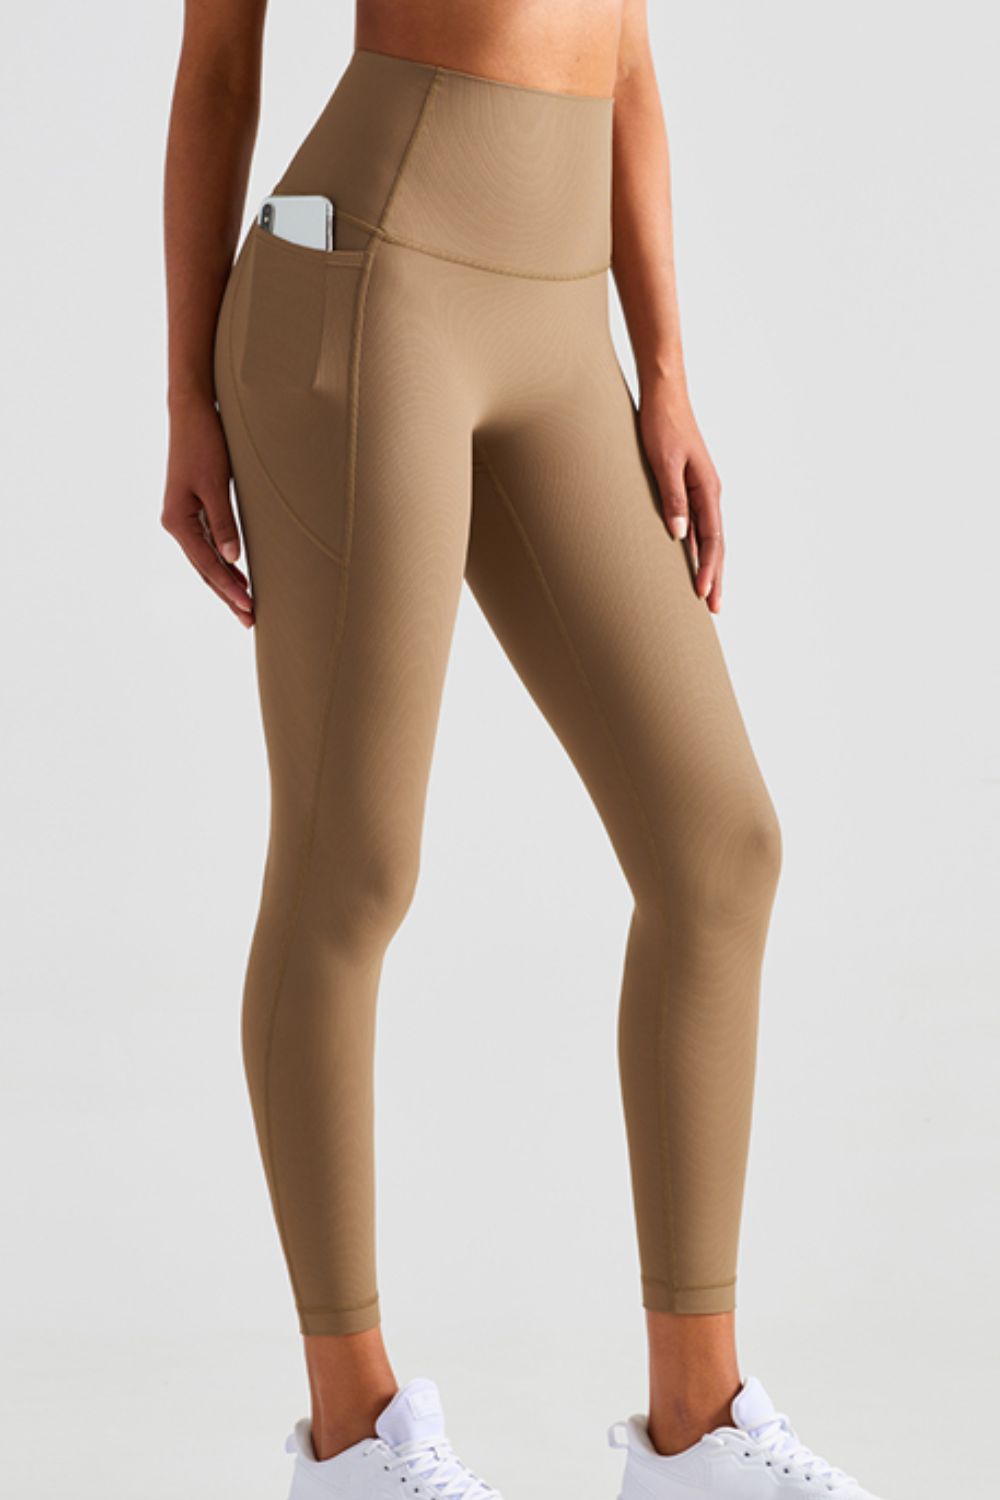 Lauren Soft and Breathable High-Waisted Yoga Leggings- 1 size 4/White and 1 size 4/Khaki left! FINAL SALE!